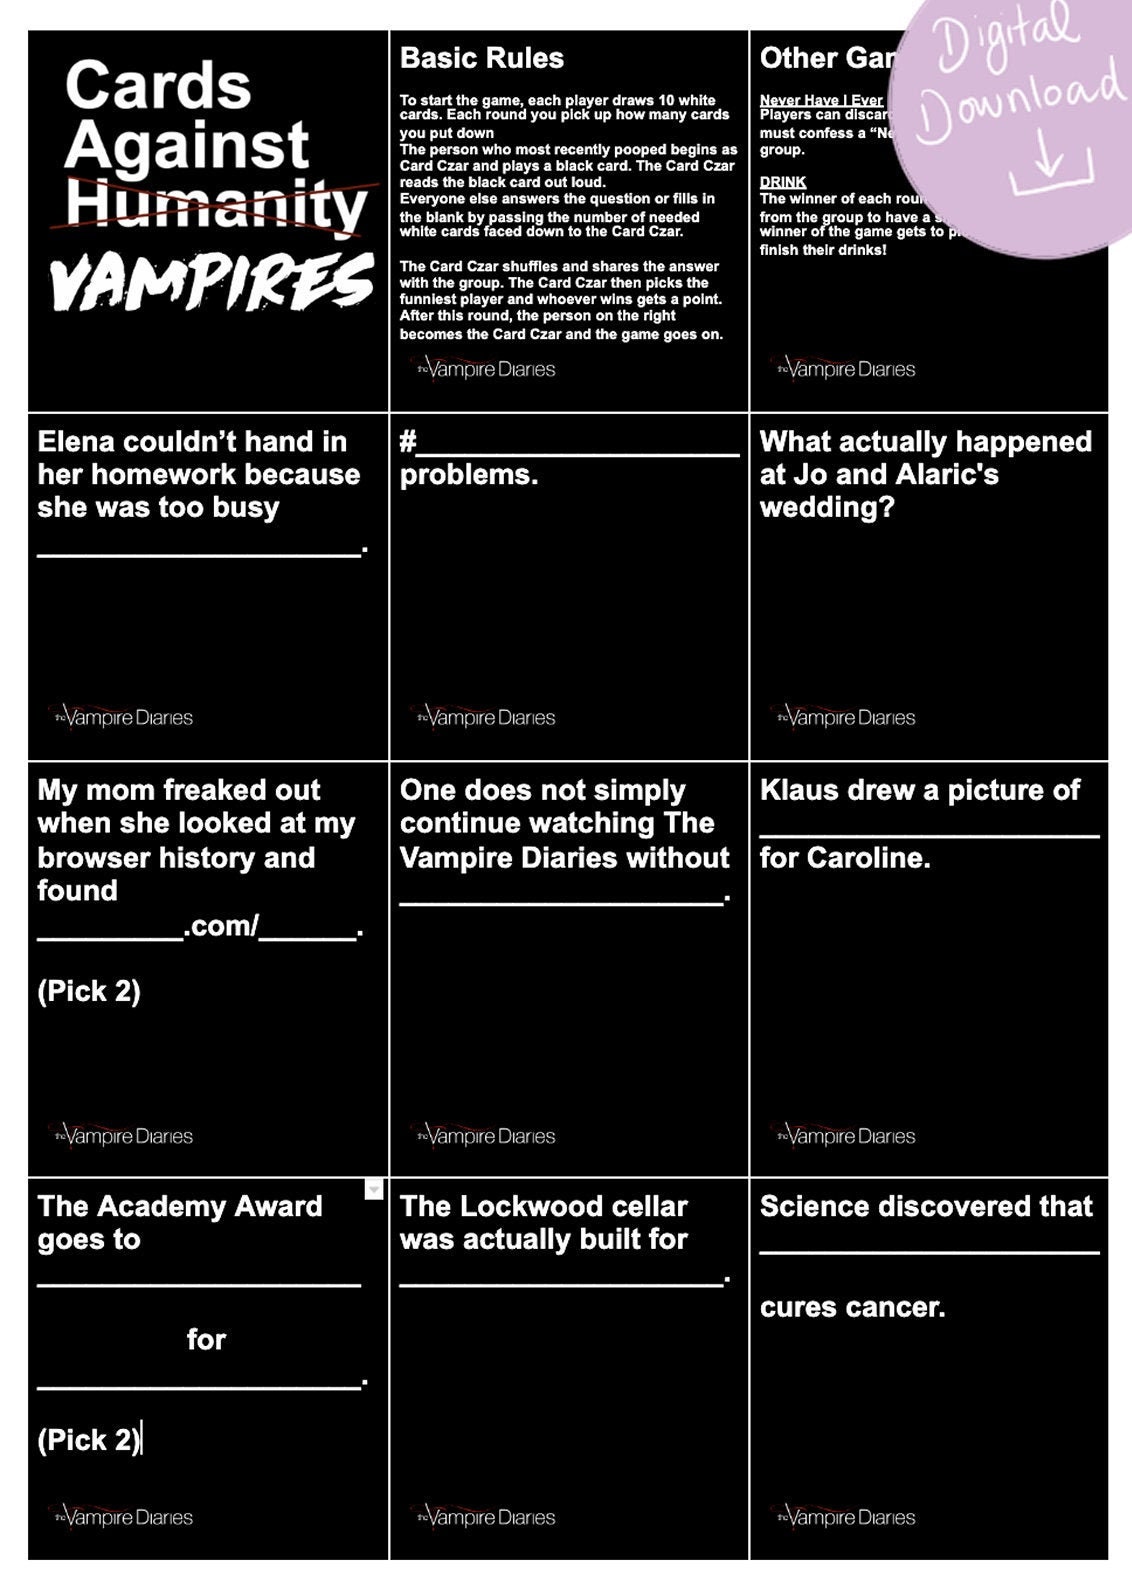 Cards Against Vampires TVD Version Cards Against Humanity